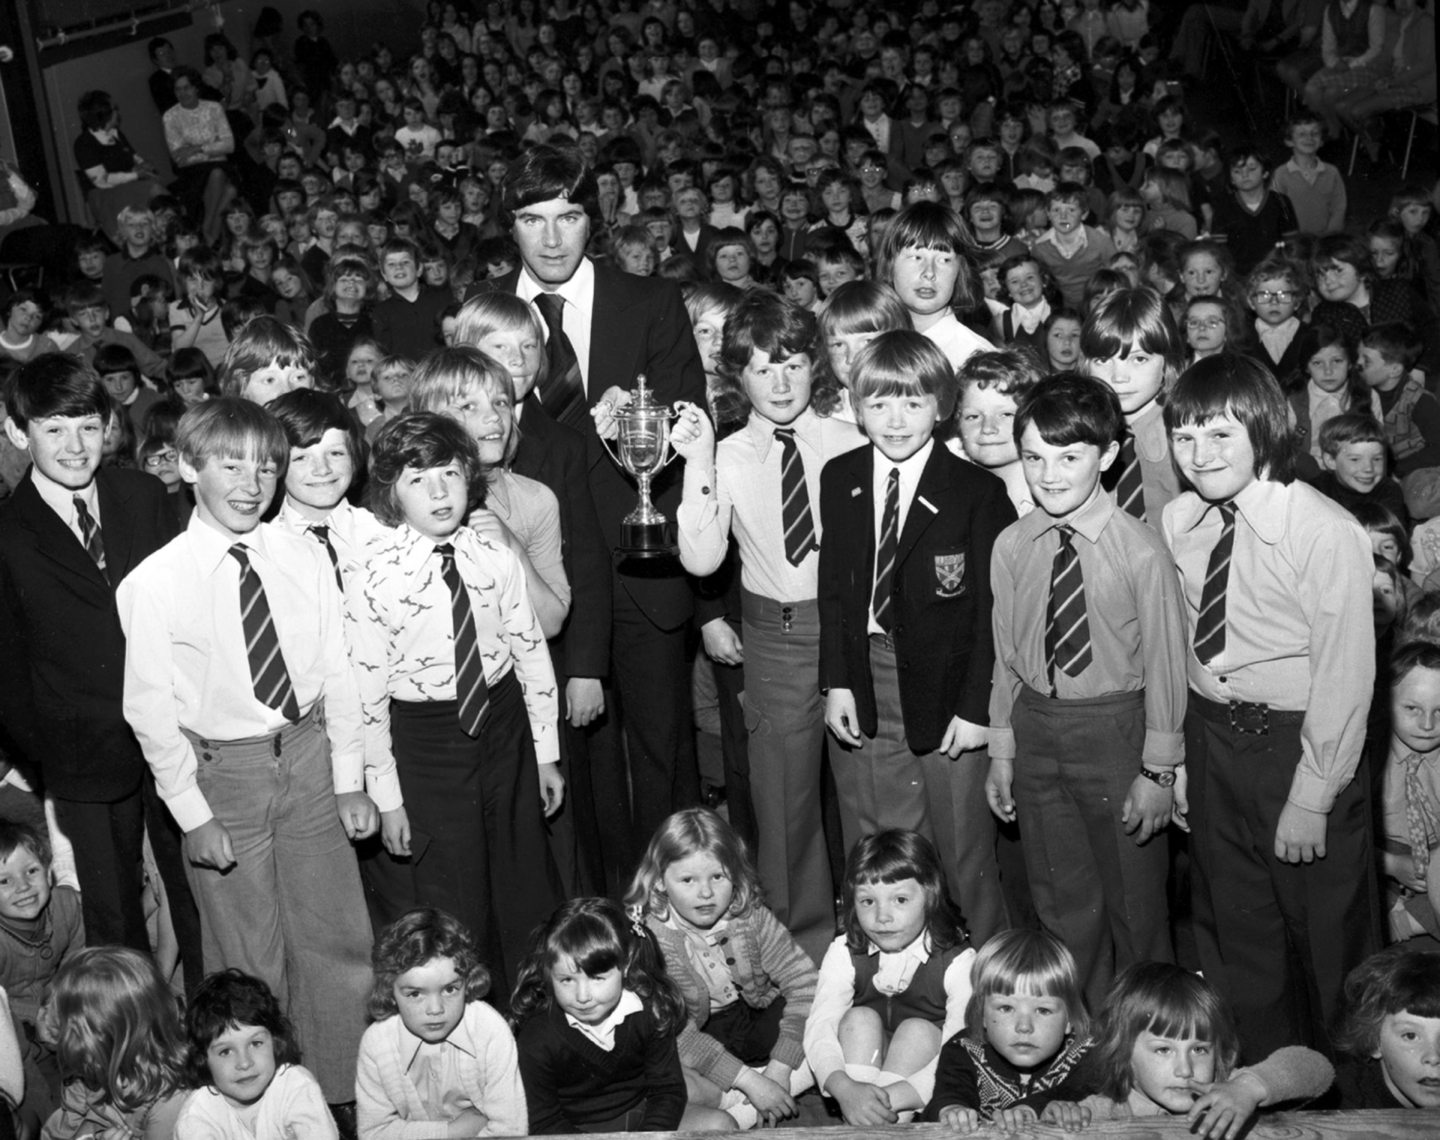 Manchester United captain and former Dons skipper Martin Buchan presenting the Aberdeen Primary League II trophy to Ronald Gray, captain of Walker Road's football team, at a special ceremony in the school hall in 1976.